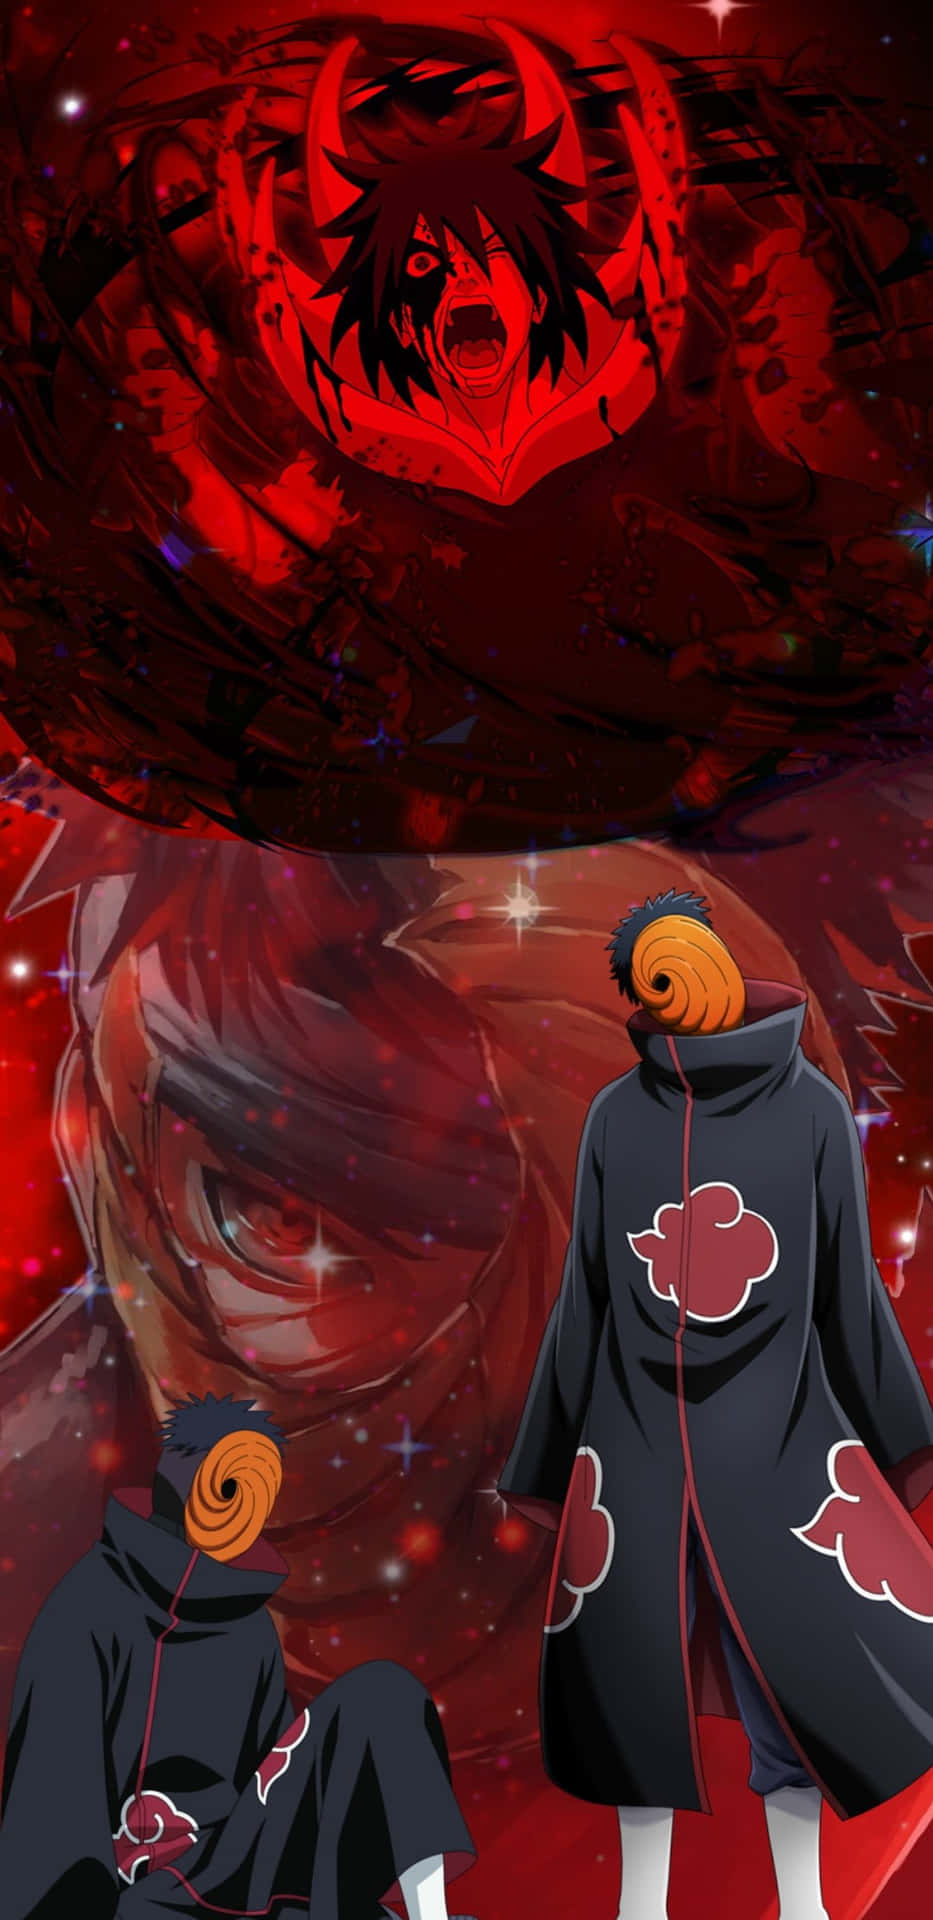 Tobi, the Akatsuki leader - fueled by ambition and shrouded in mystery." Wallpaper